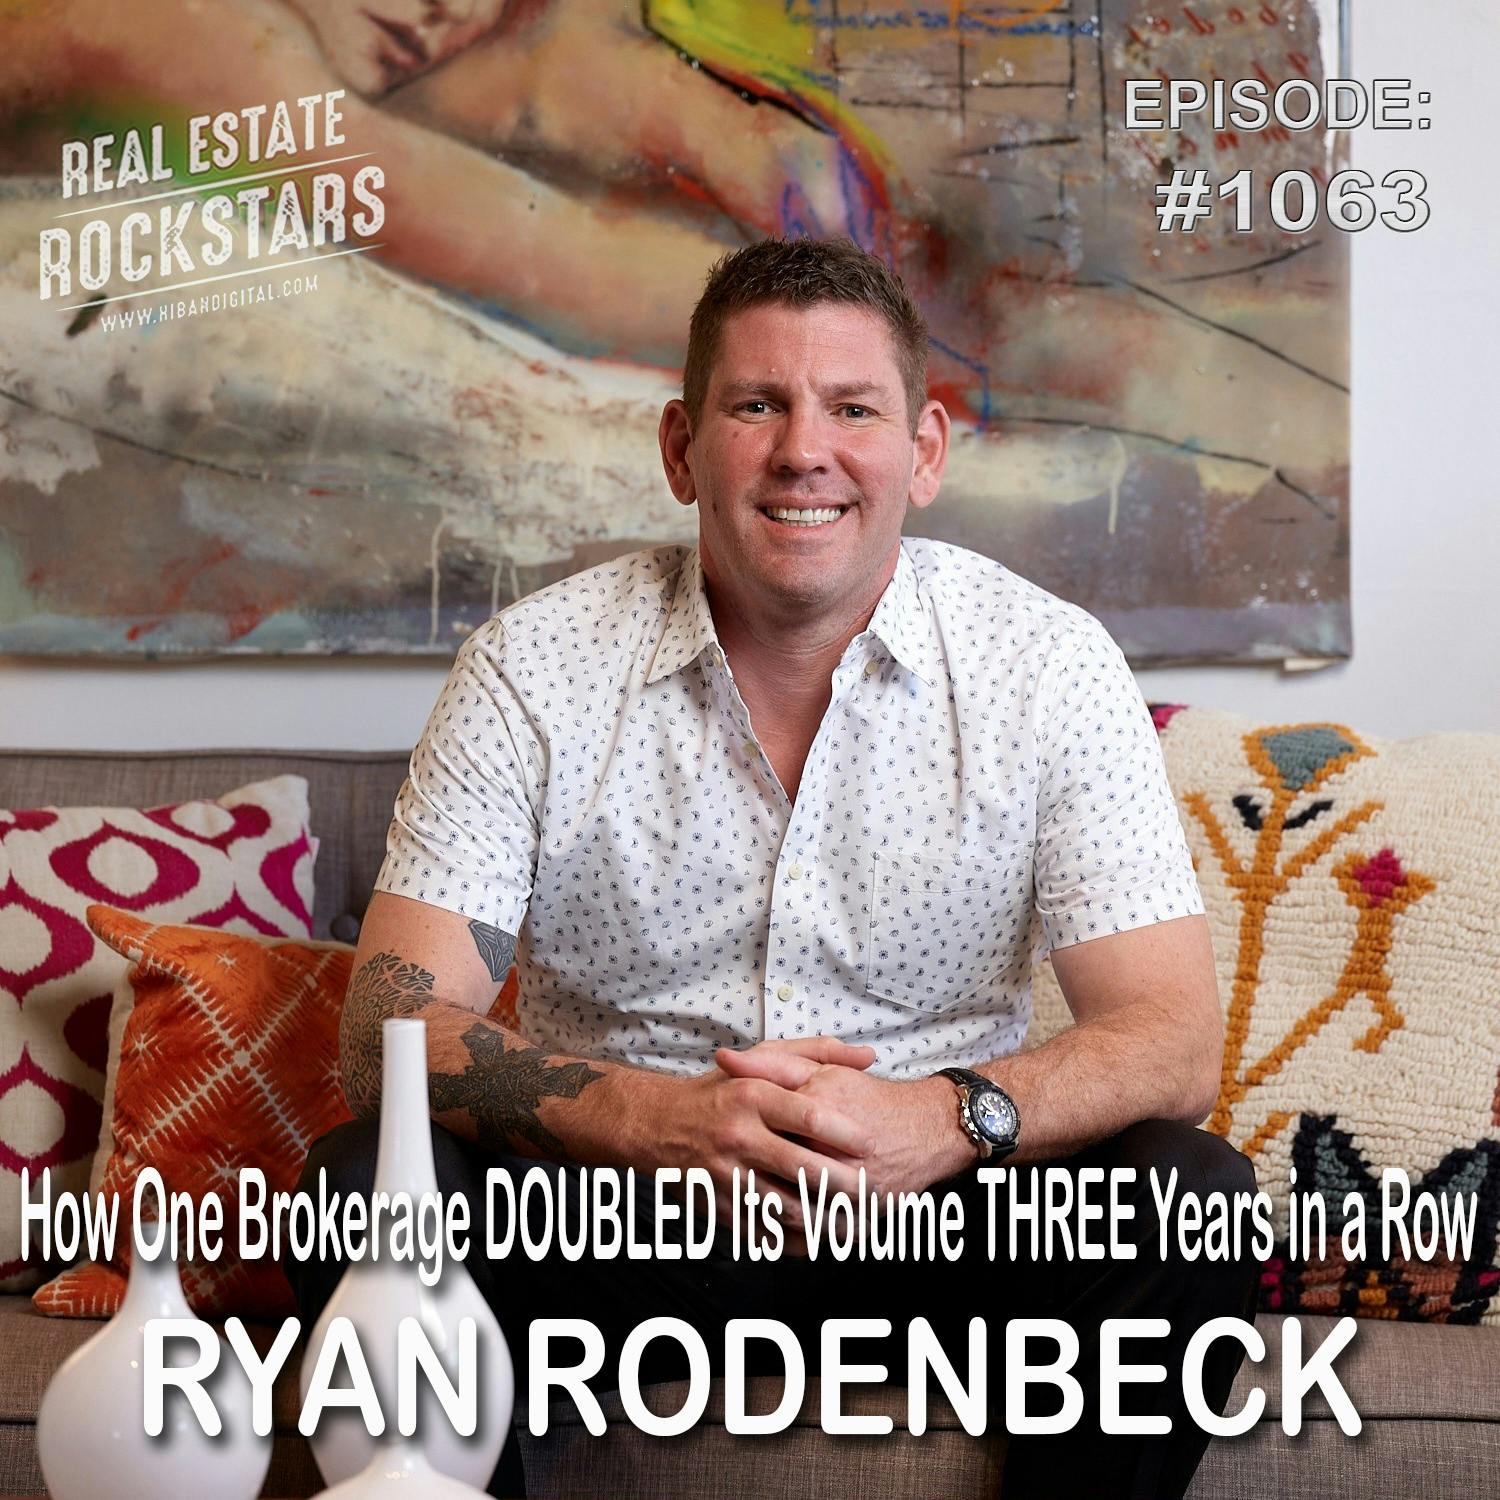 1063: How One Brokerage DOUBLED Its Volume THREE Years in a Row - Ryan Rodenbeck